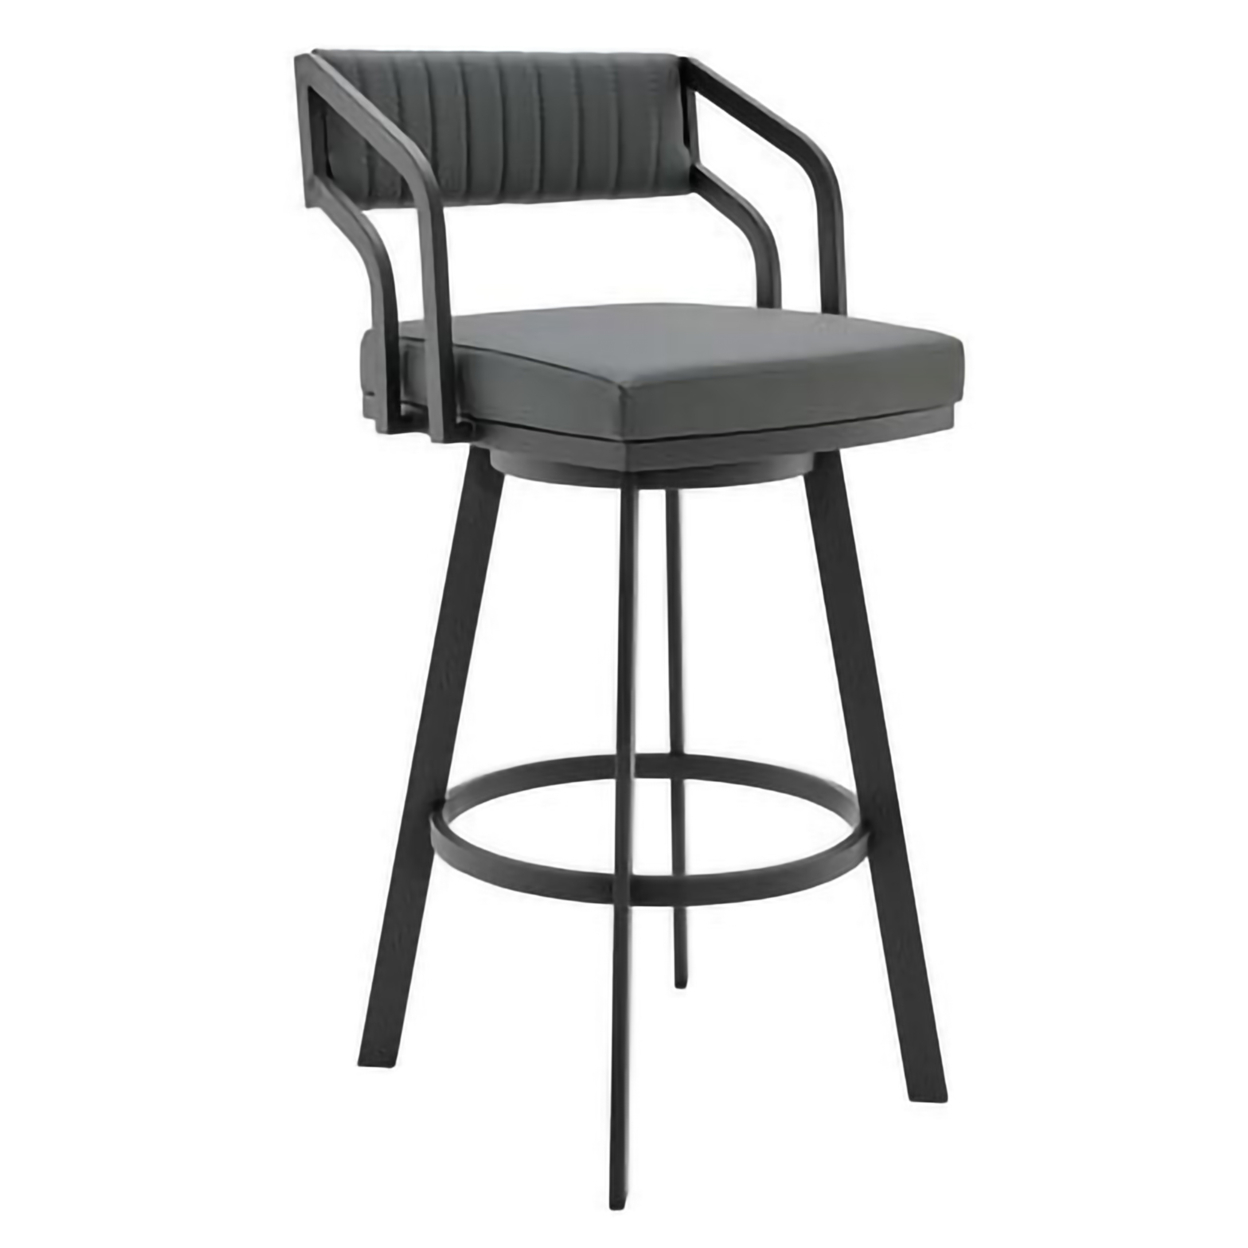 30 Inch Barstool With Leatherette Padded Seat, Gray And Black- Saltoro Sherpi